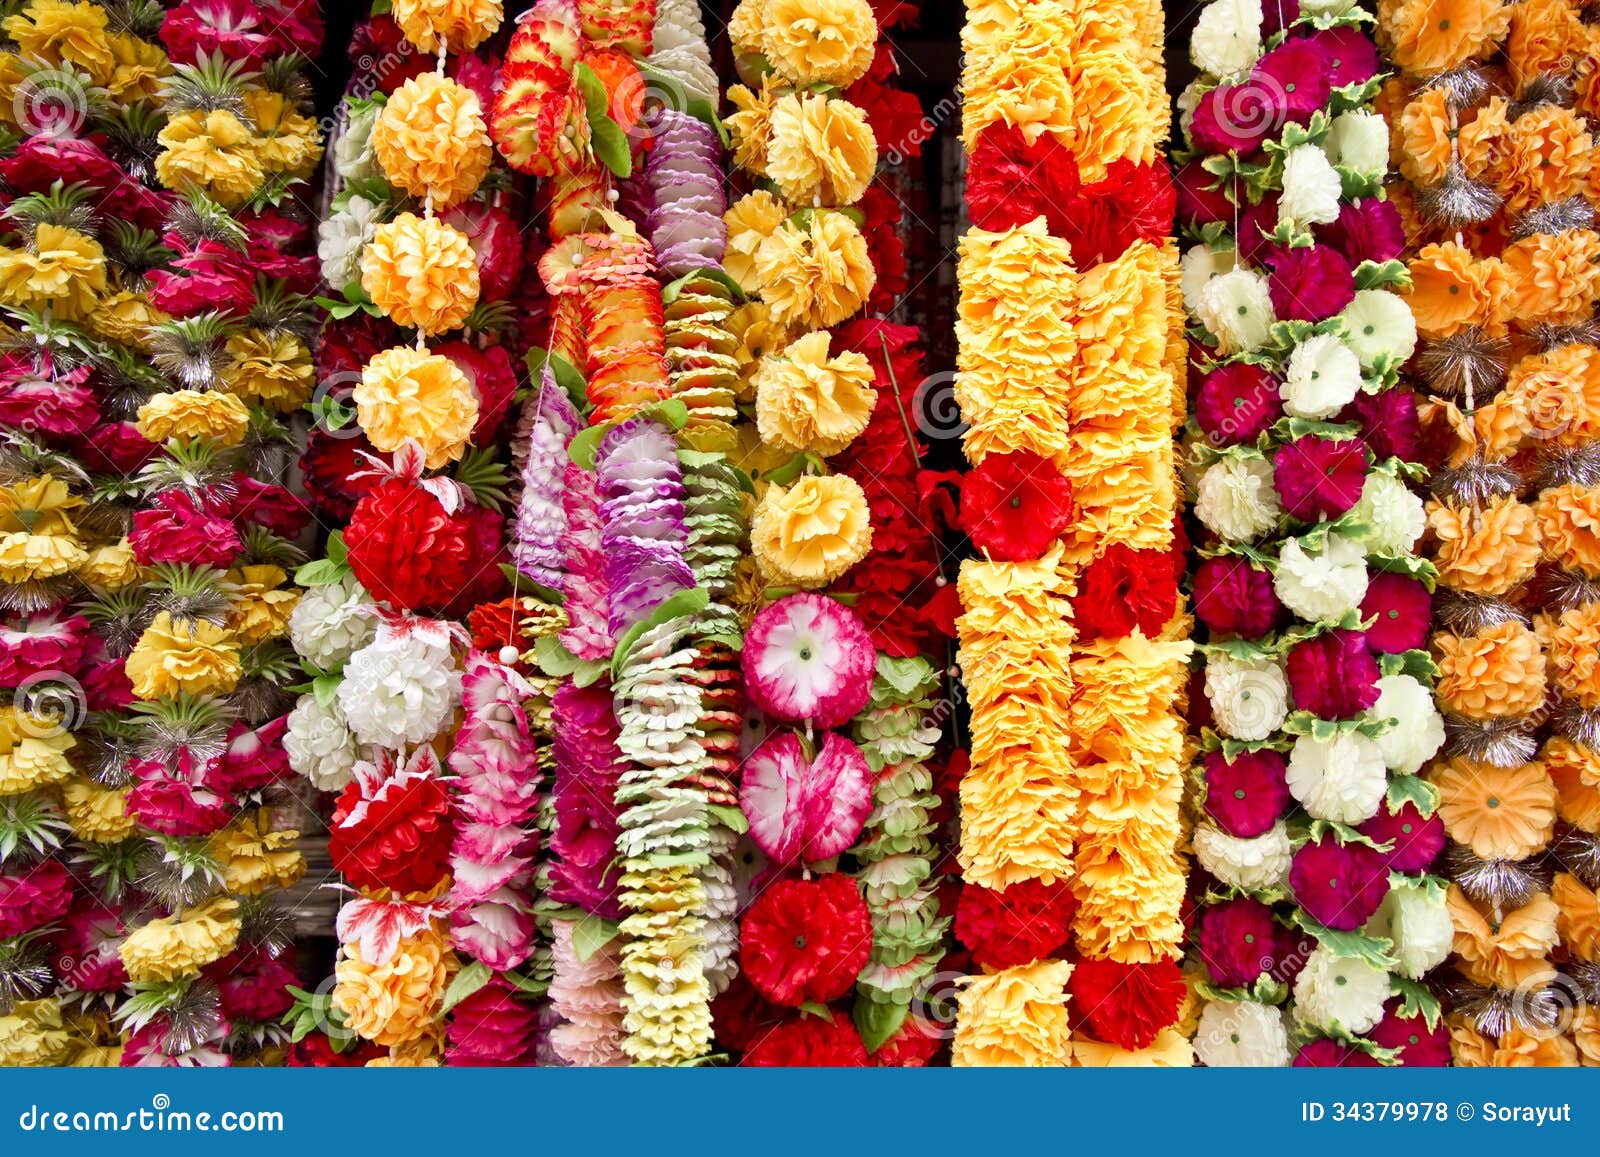 Garland stock photo. Image of neck, multi, garland, floral - 34379978